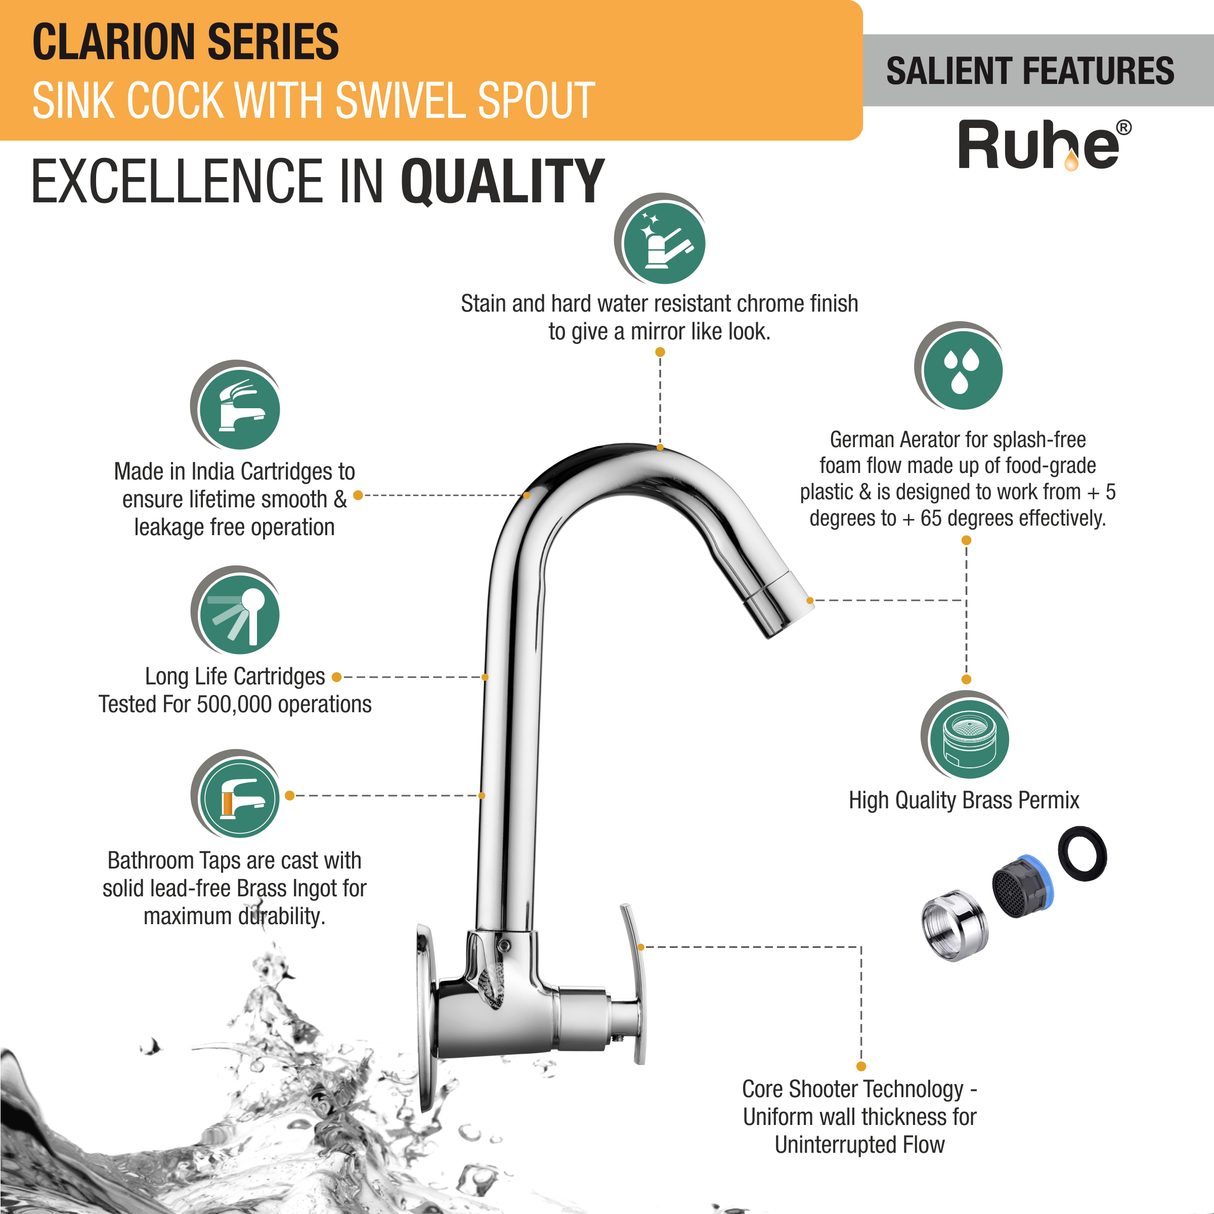 Clarion Sink Tap with Small (12 inches) Round Swivel Spout Faucet features